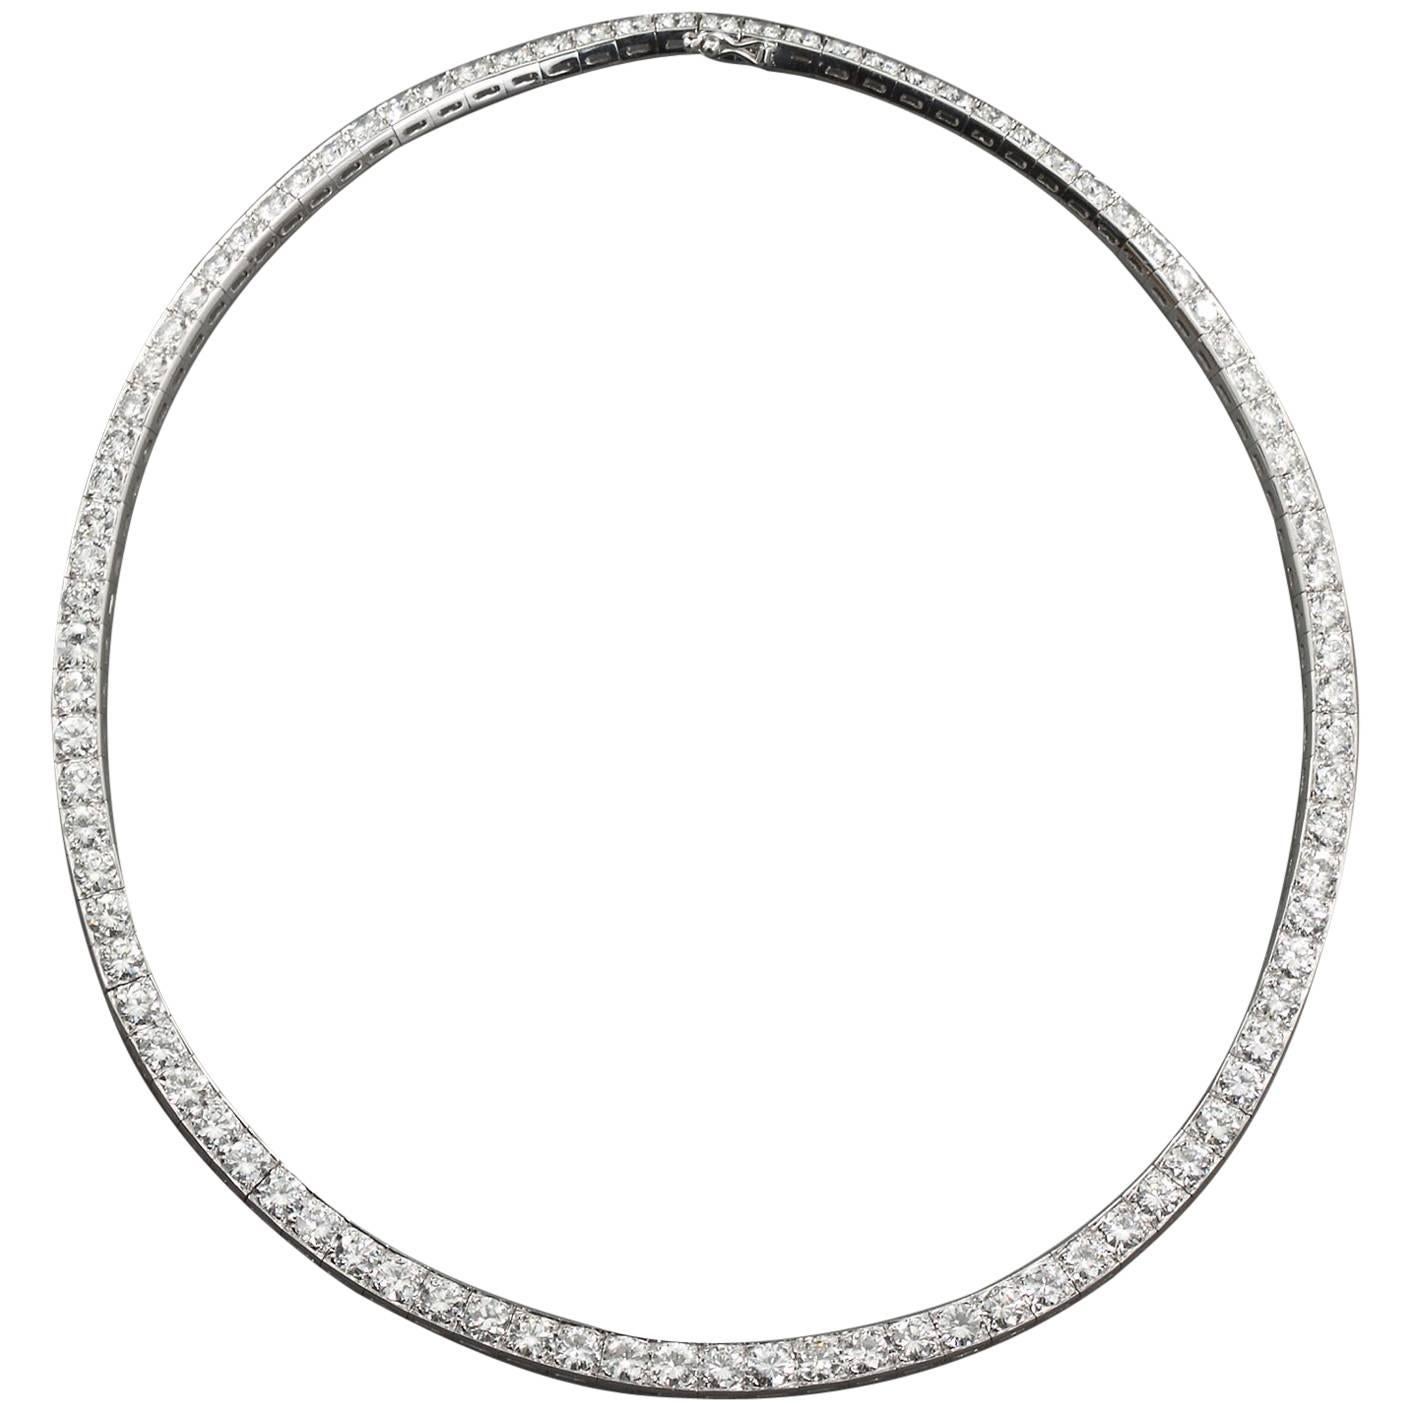 Diamond in White Gold Collar Necklace 27 Carats